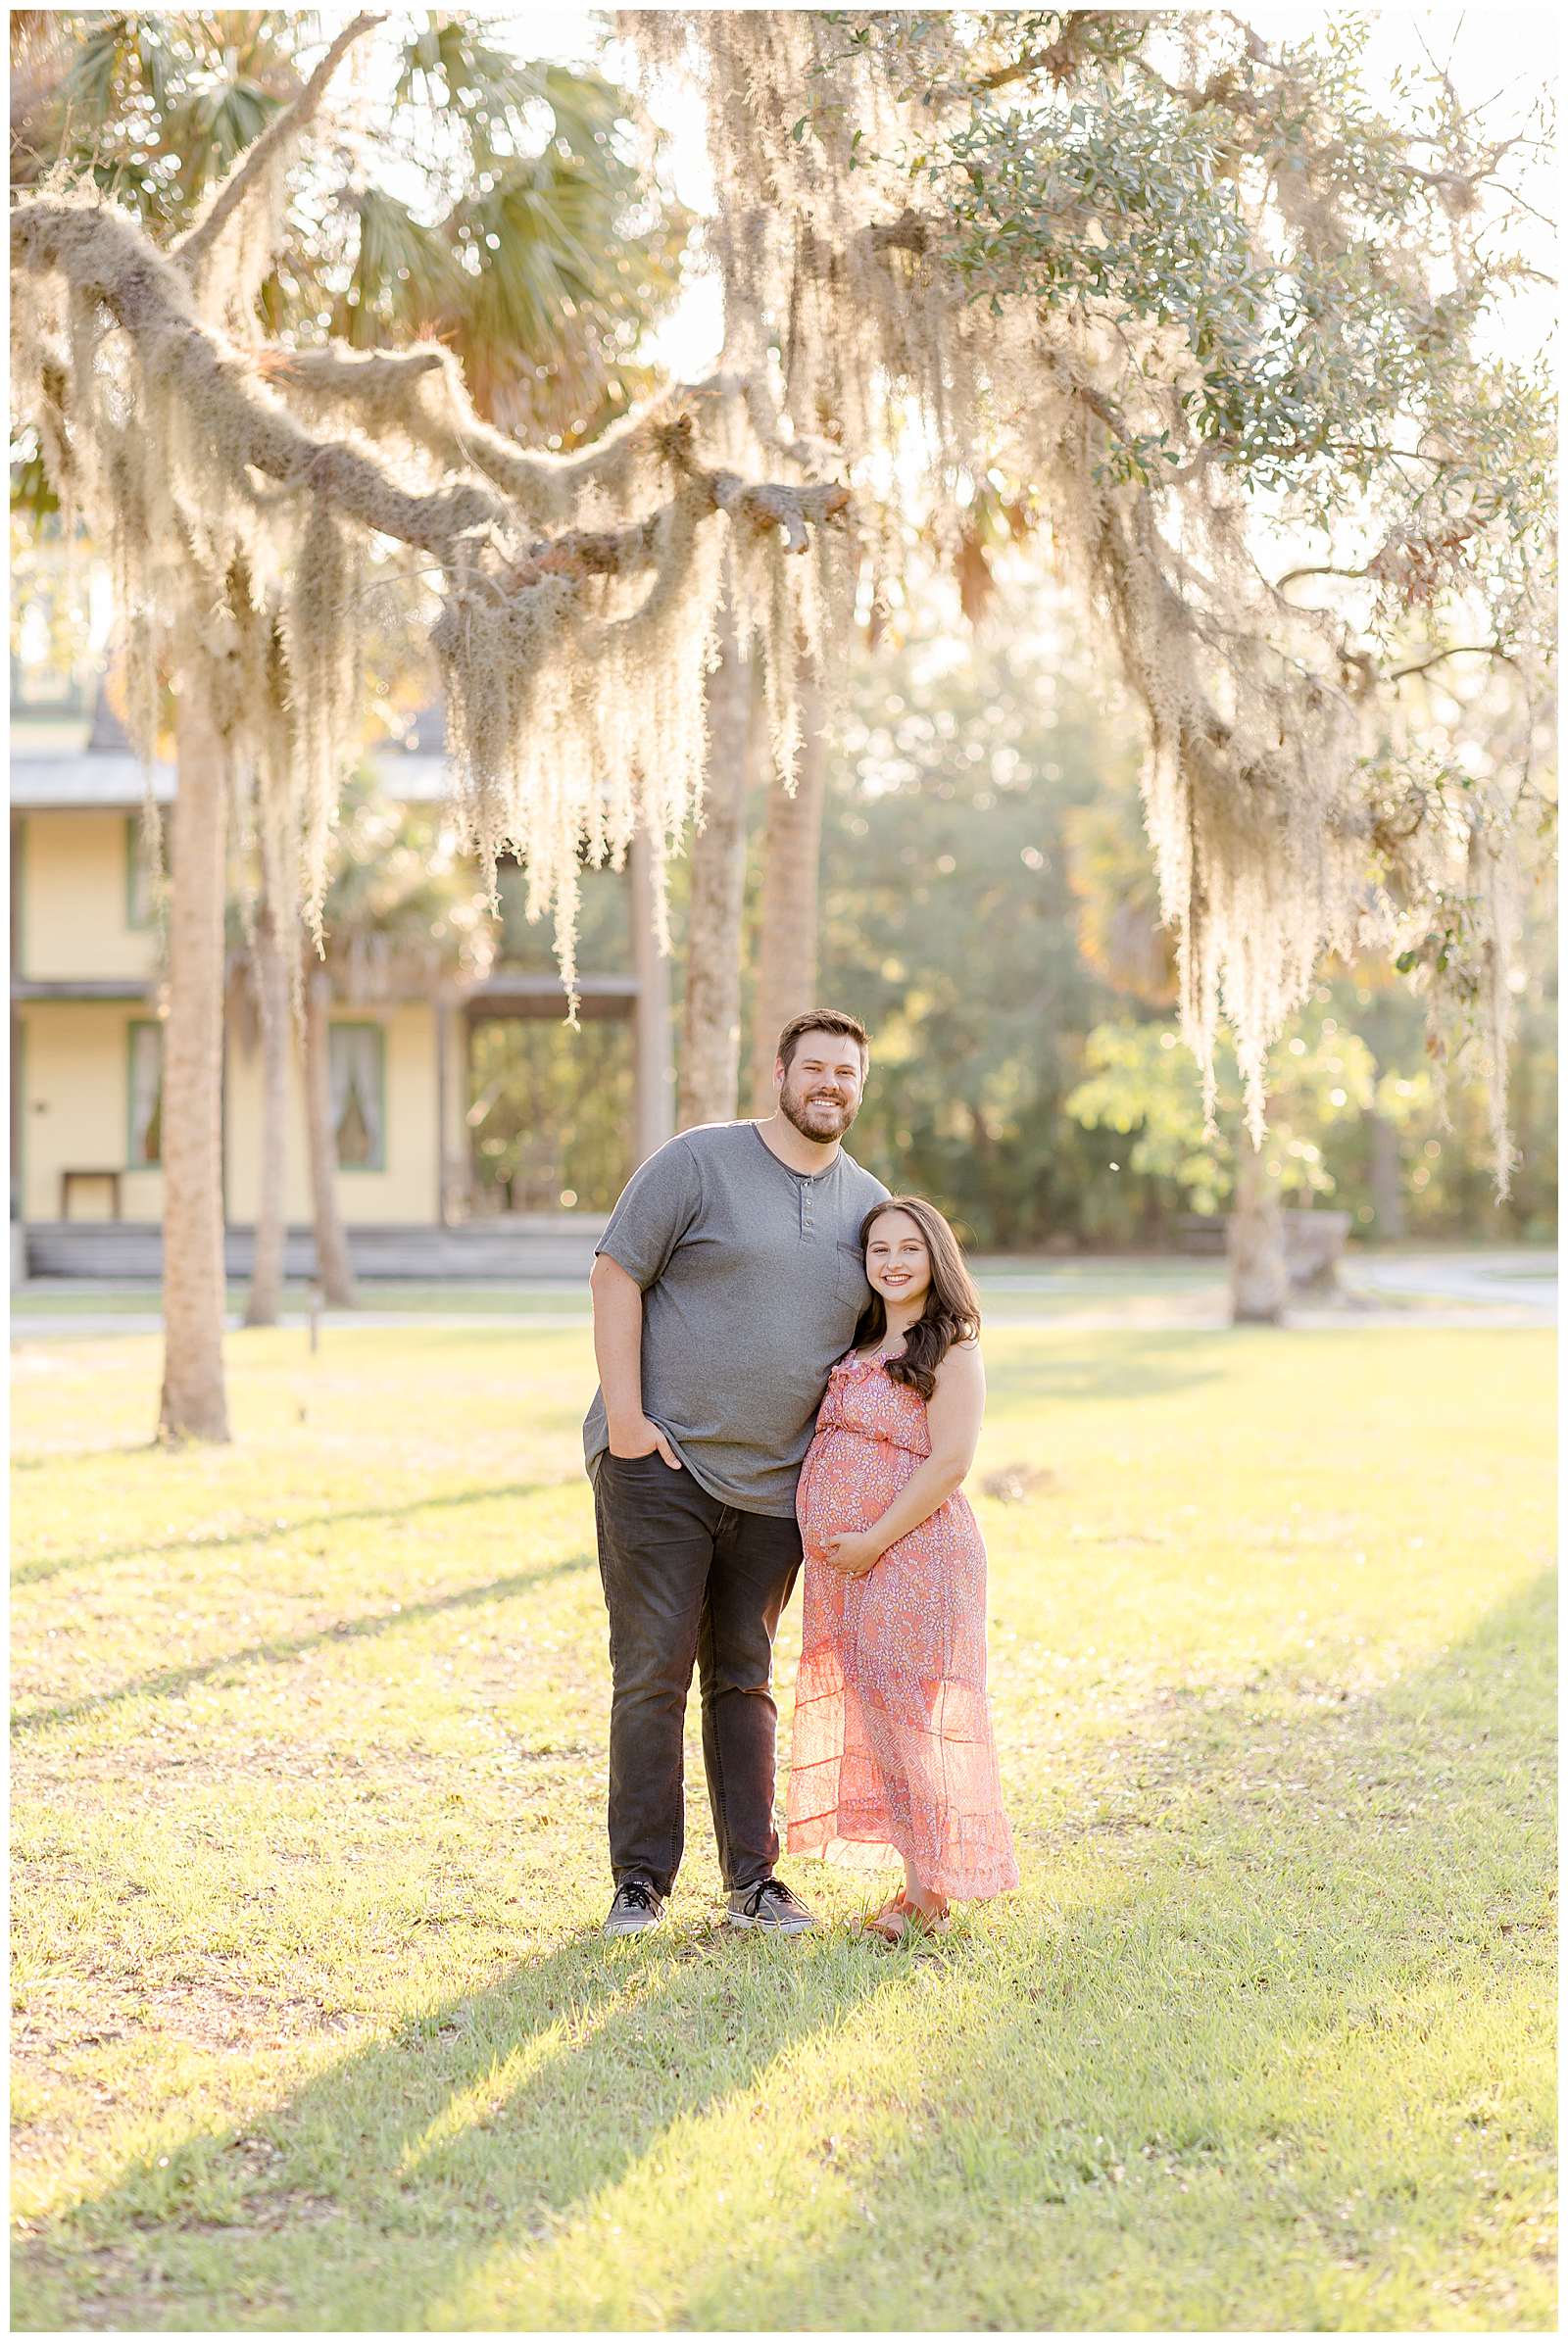 Couple with a foot and a half height difference stand in Florida, low cut grass with hanging moss trees above them as they smile at the camera with an expecting baby belly!  Click to see more of this session on the blog today!
-rebeccaricephoto.com